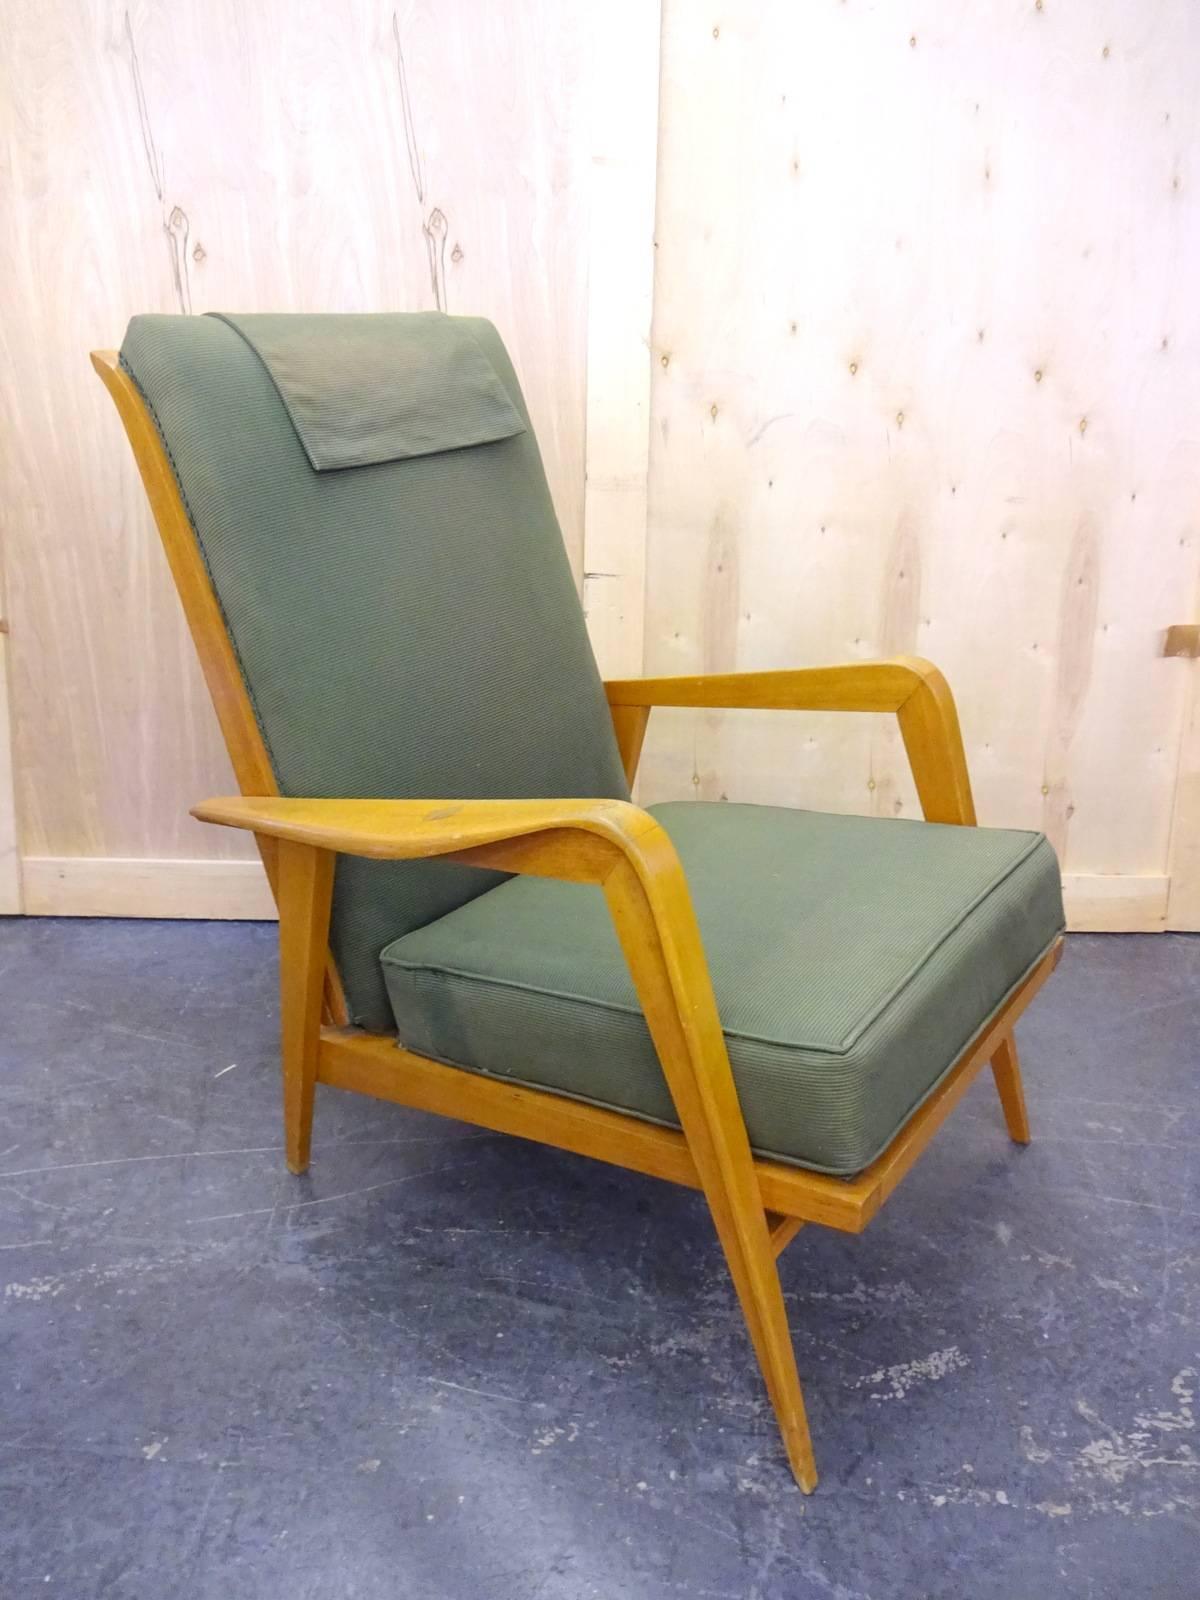 Pair of French, 1950s chairs in original condition. 
Located in Brooklyn.